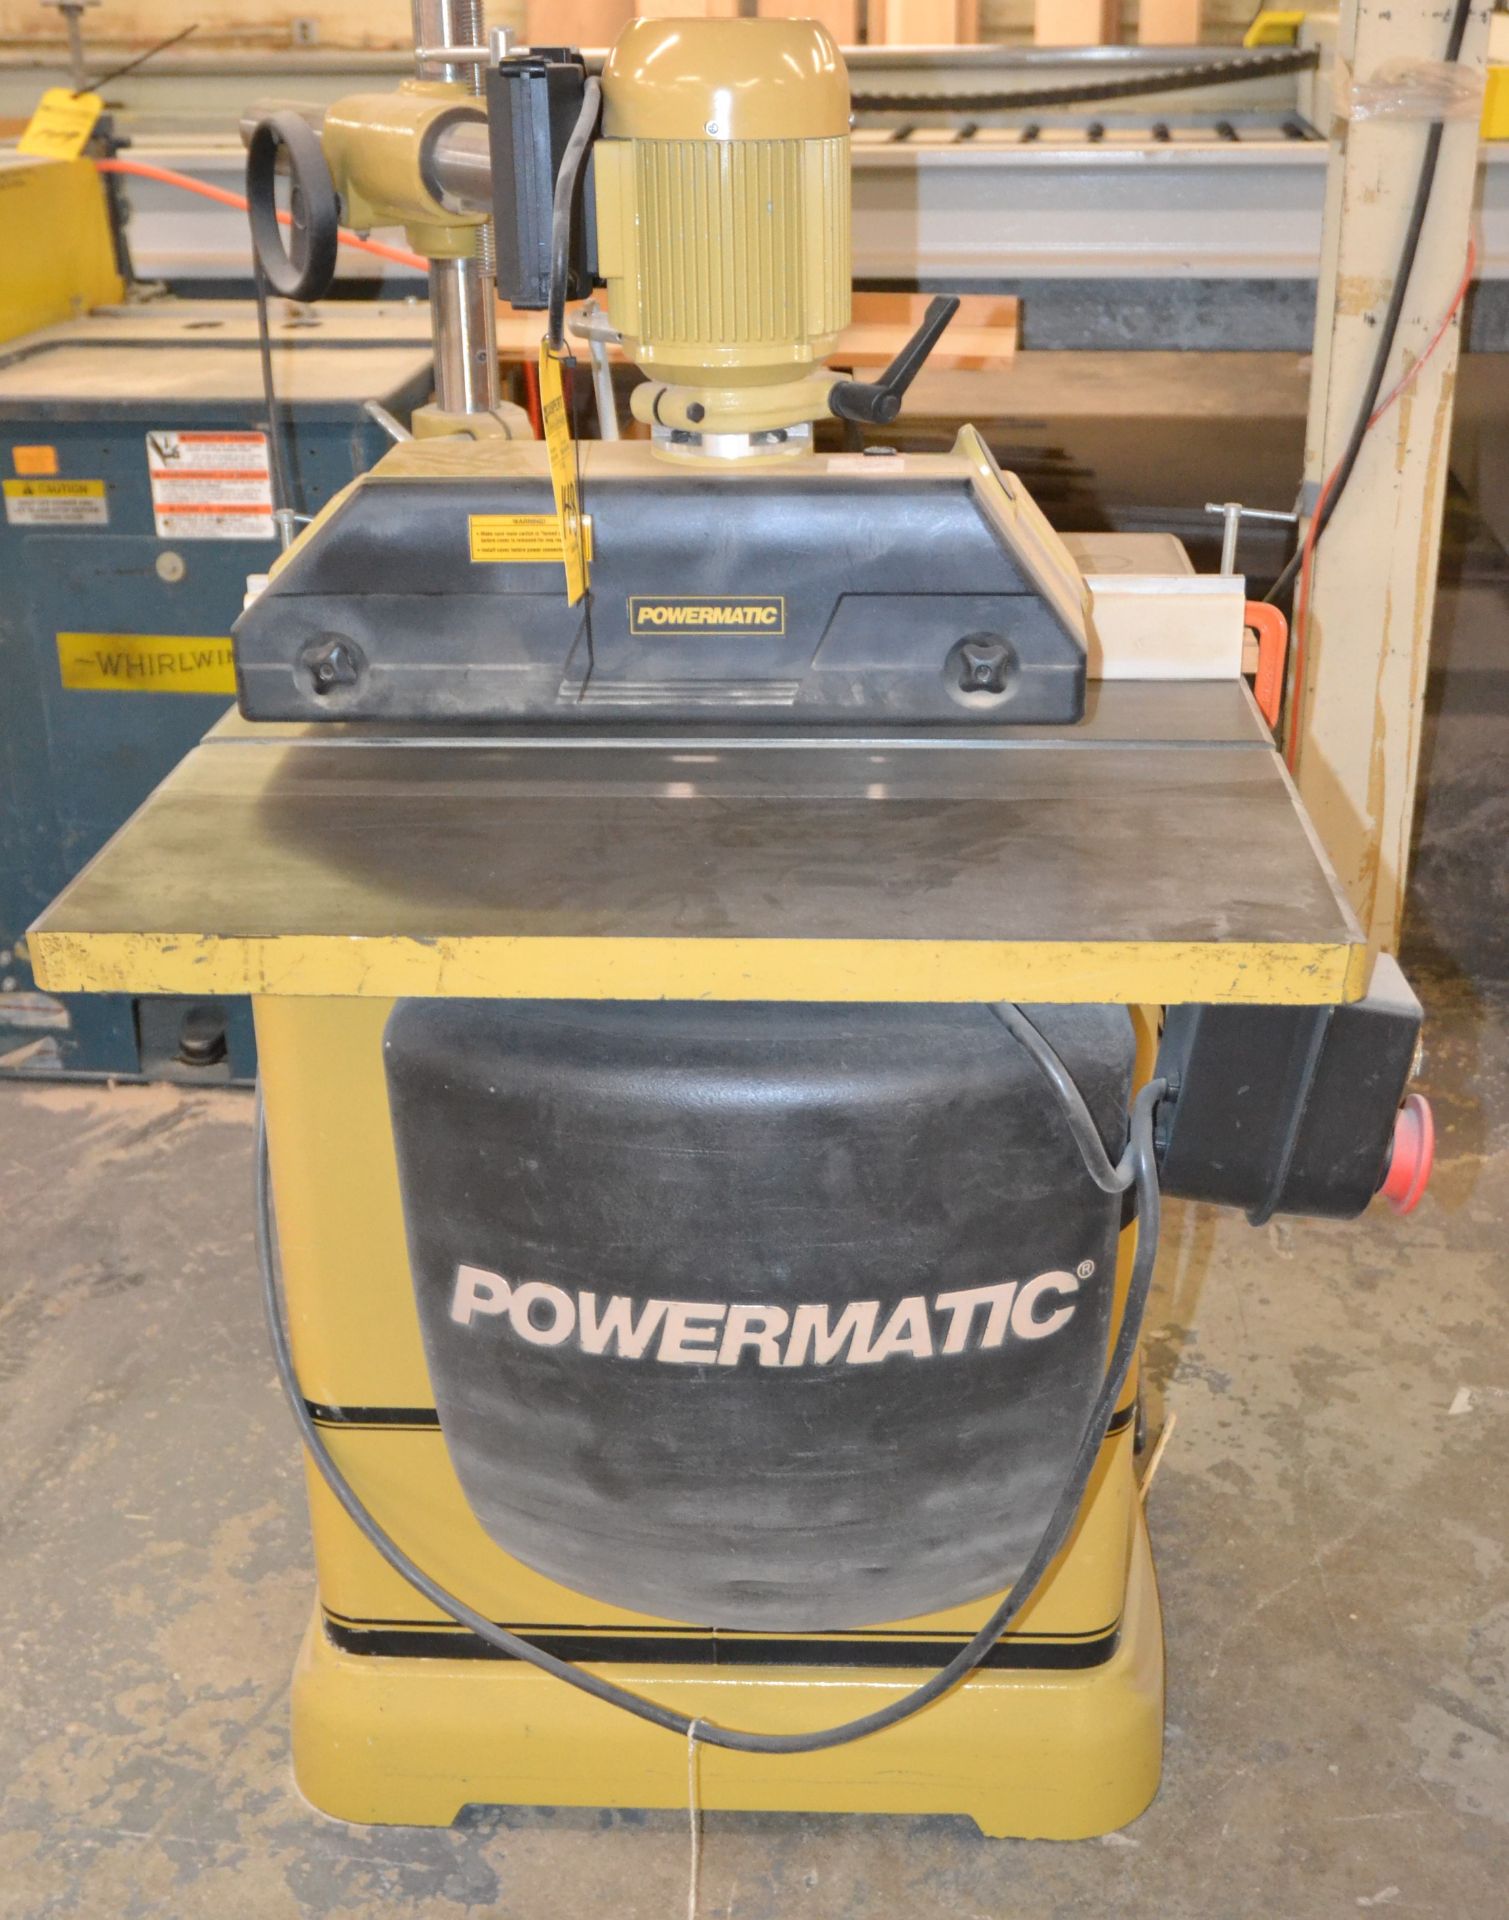 POWERMATIC TABLE SAW AND FEEDER